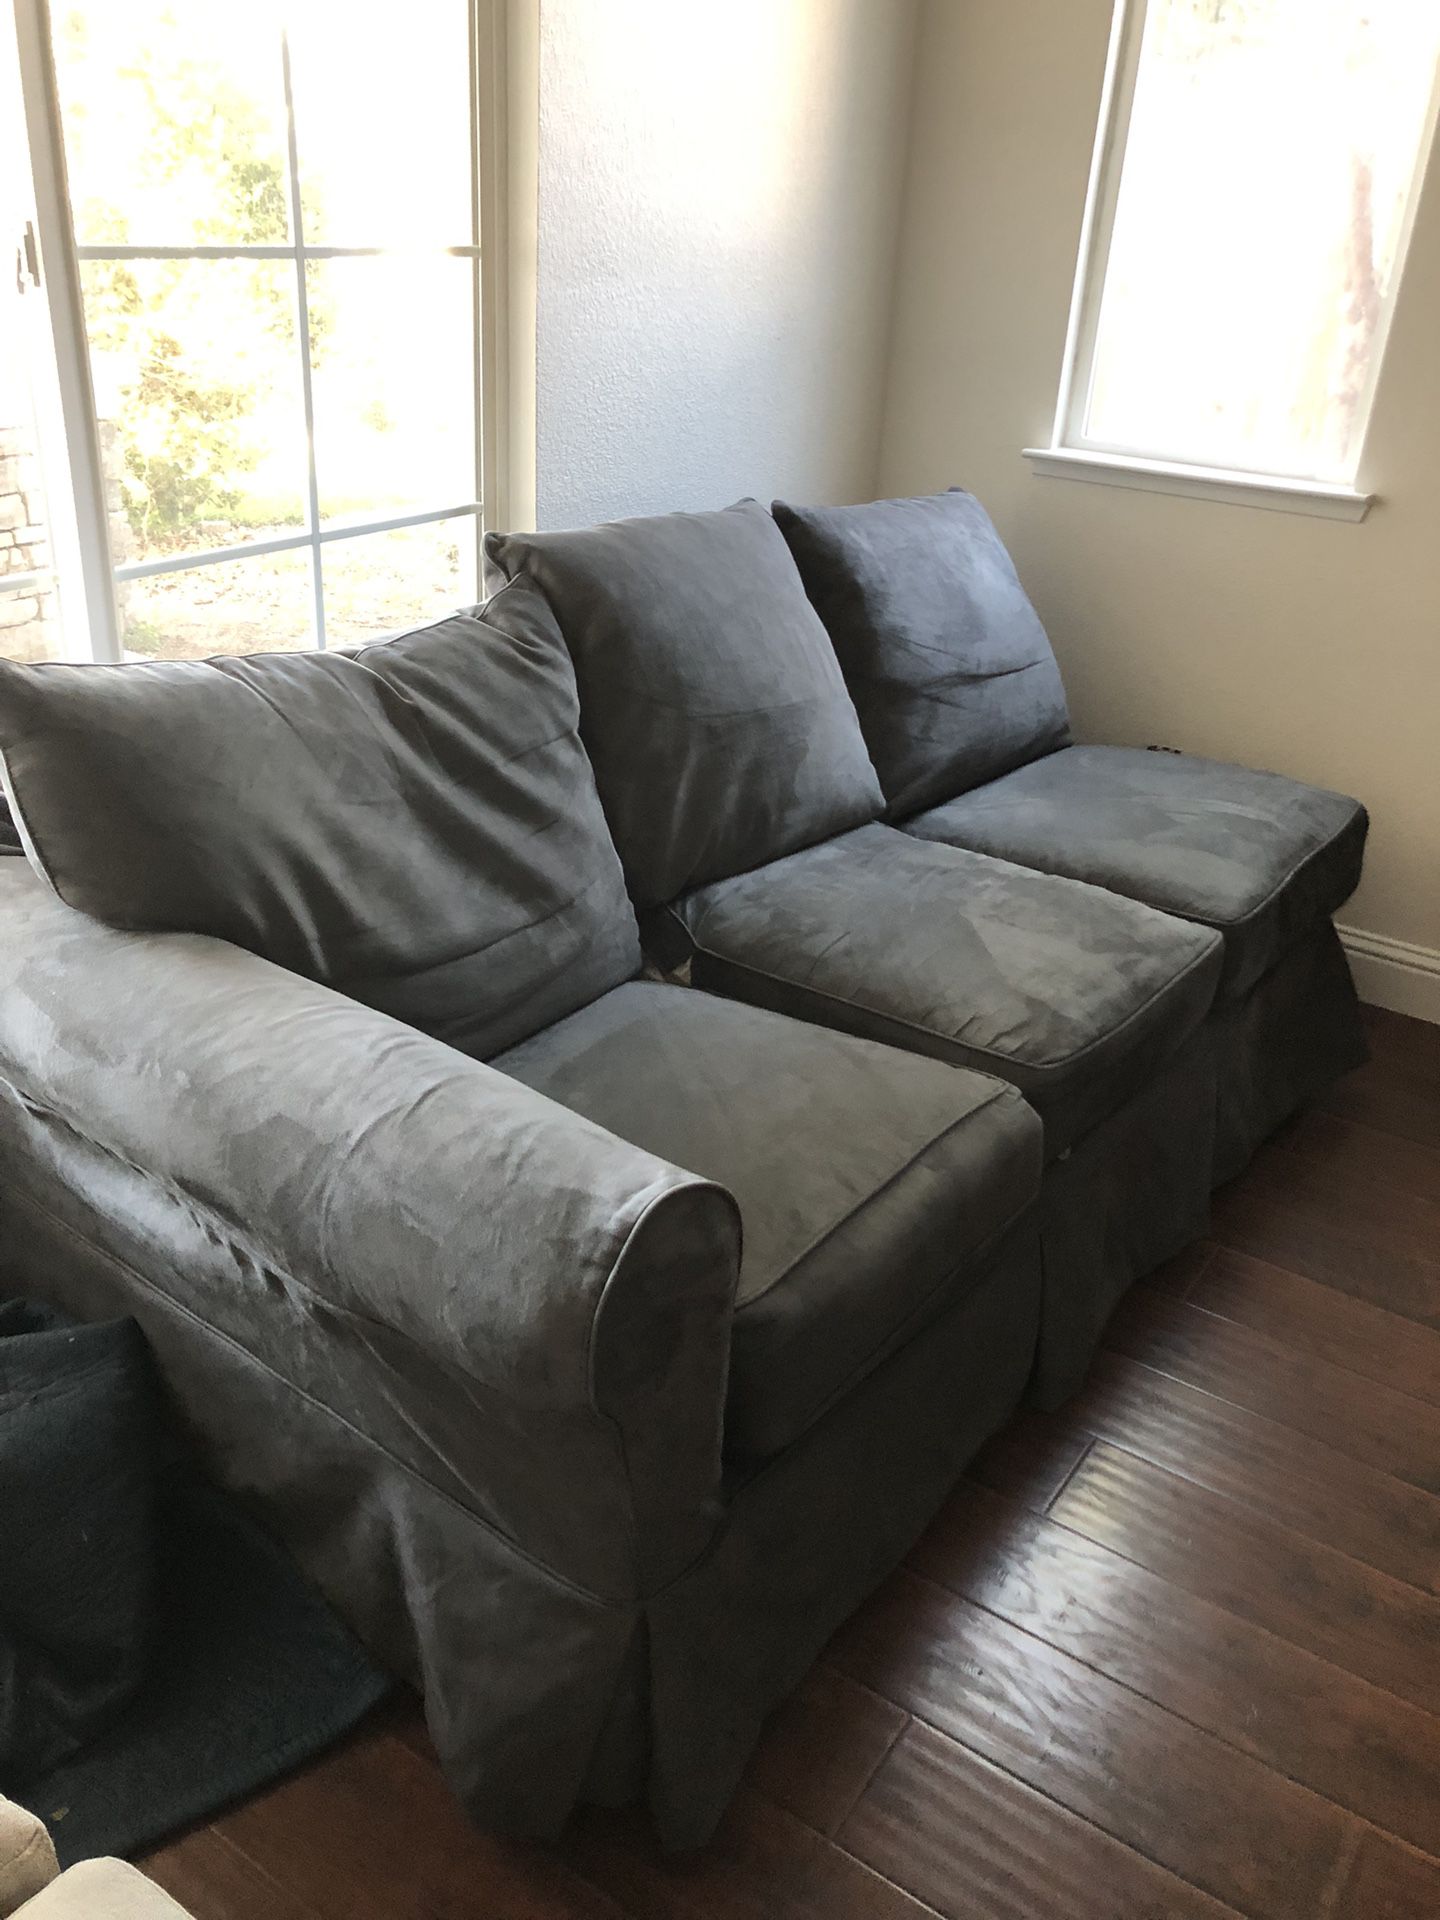 Grey Suede Couch